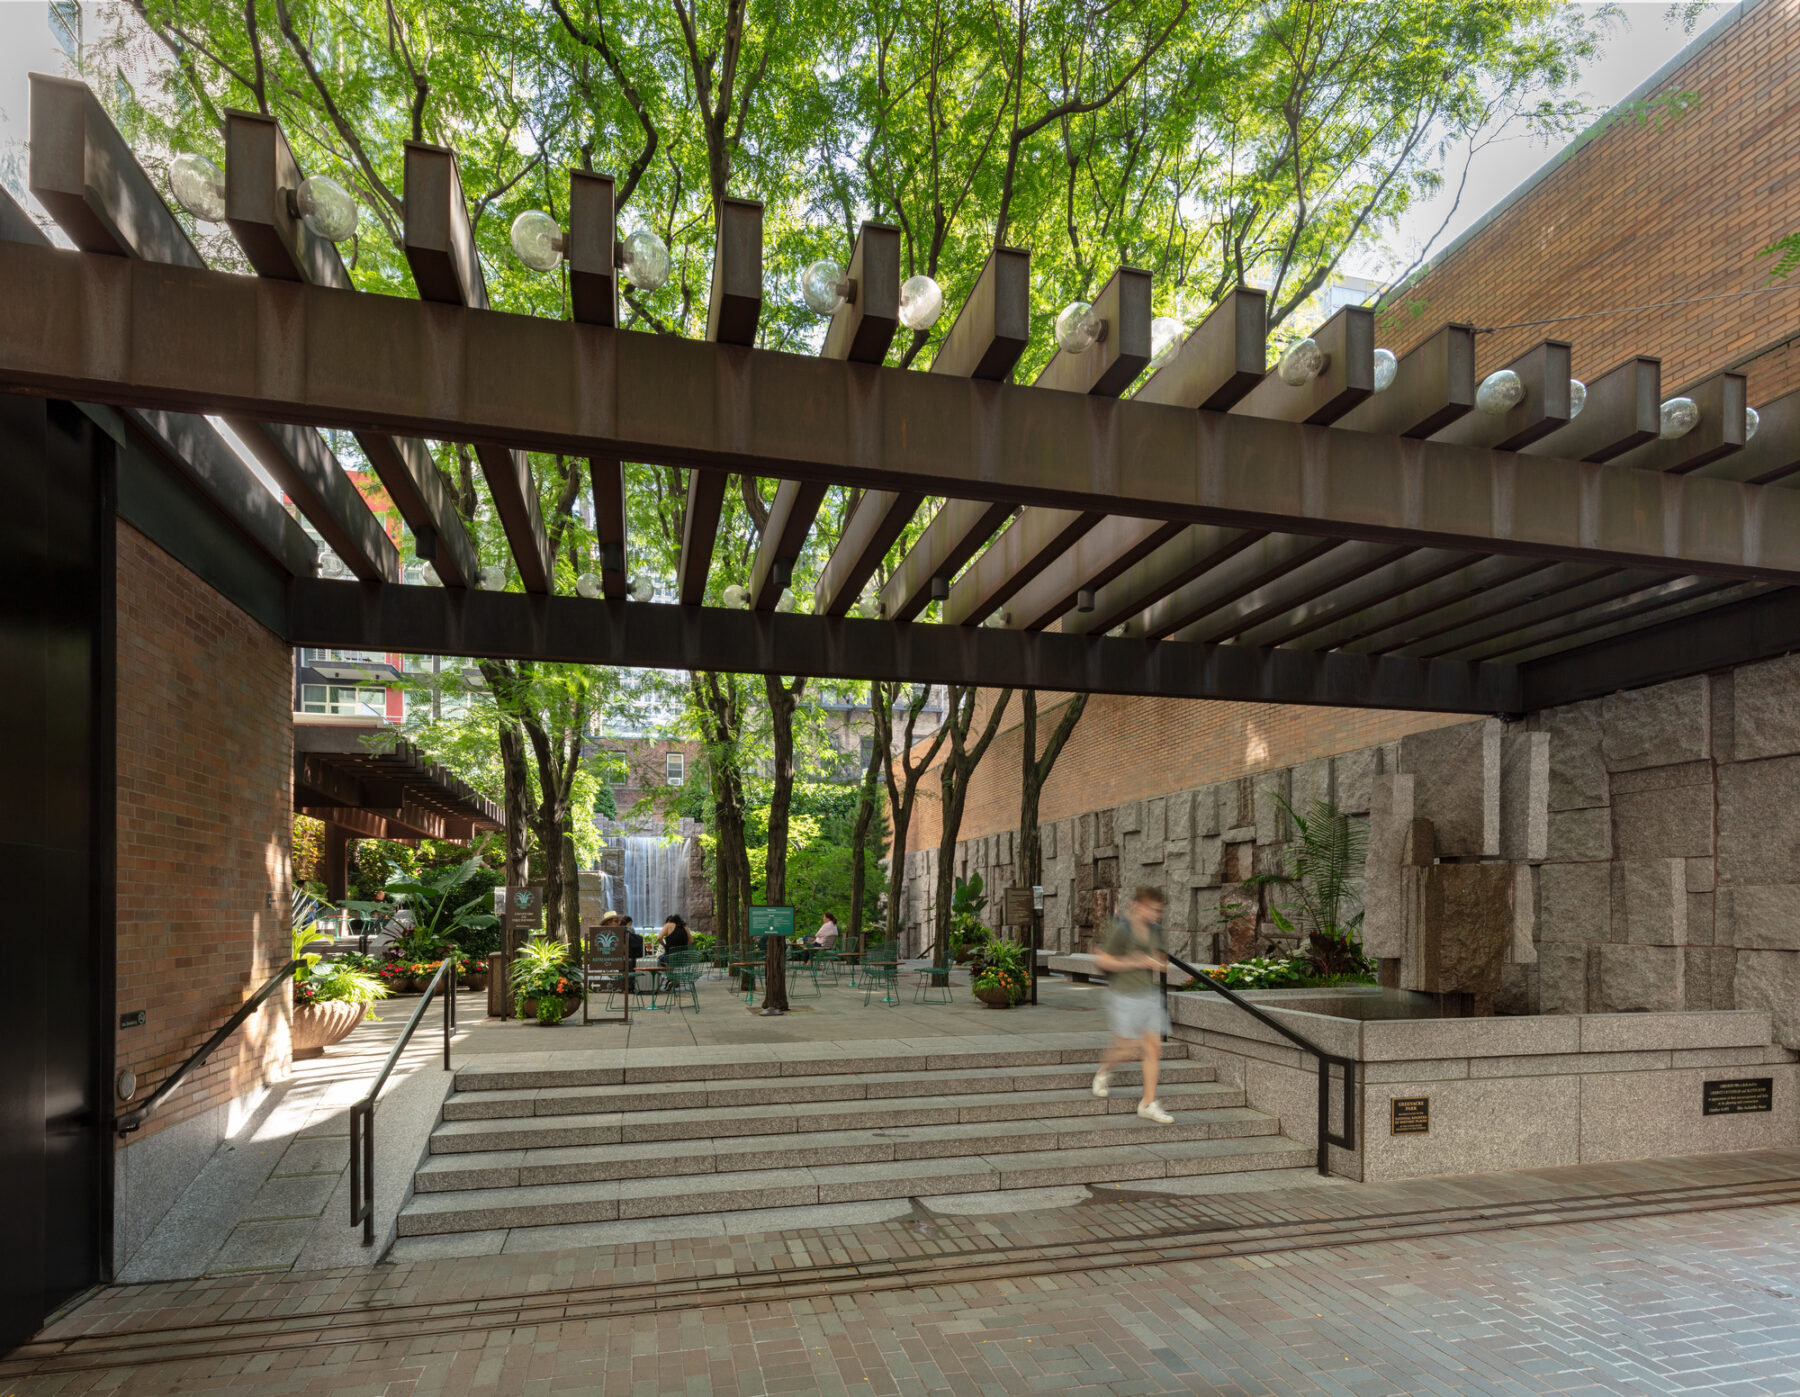 Photo with street view of the park entry, framed by overhanging trellis with trees growing behind and above and visitors walking in and out of the entry stairs.